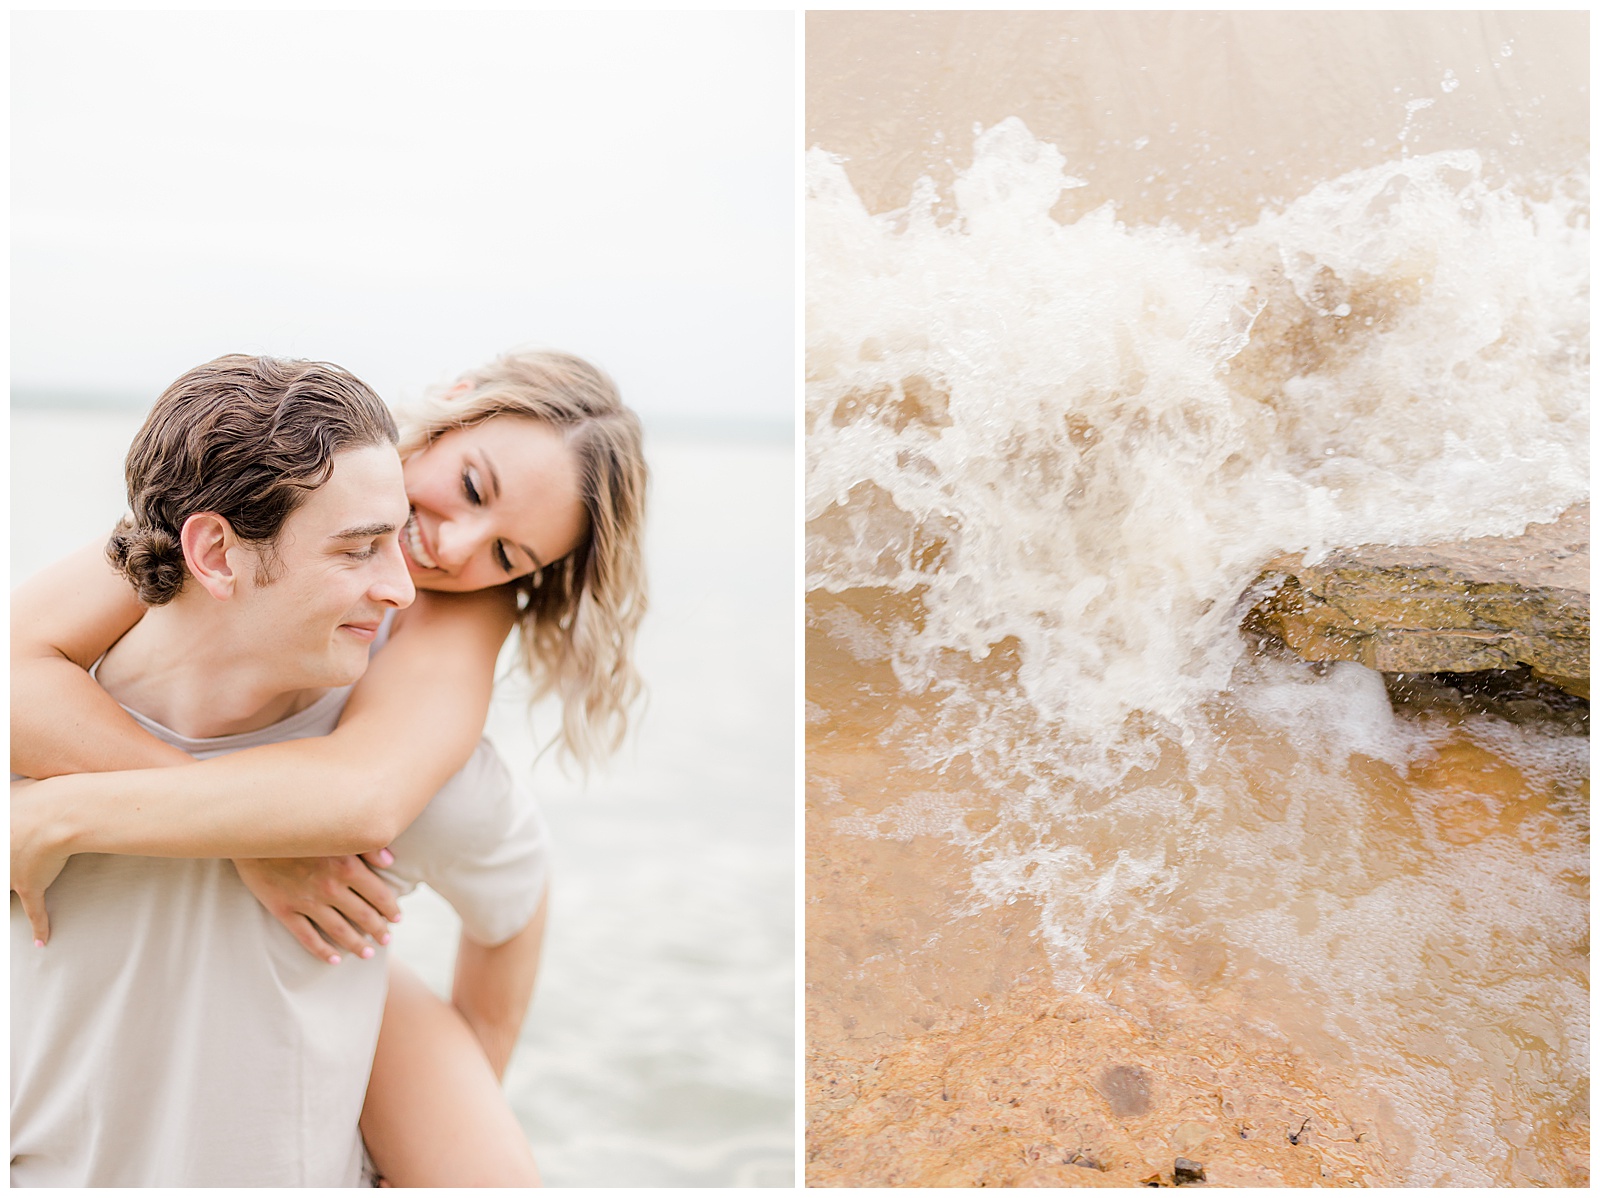 Lakeside engagement session at Rockledge Park